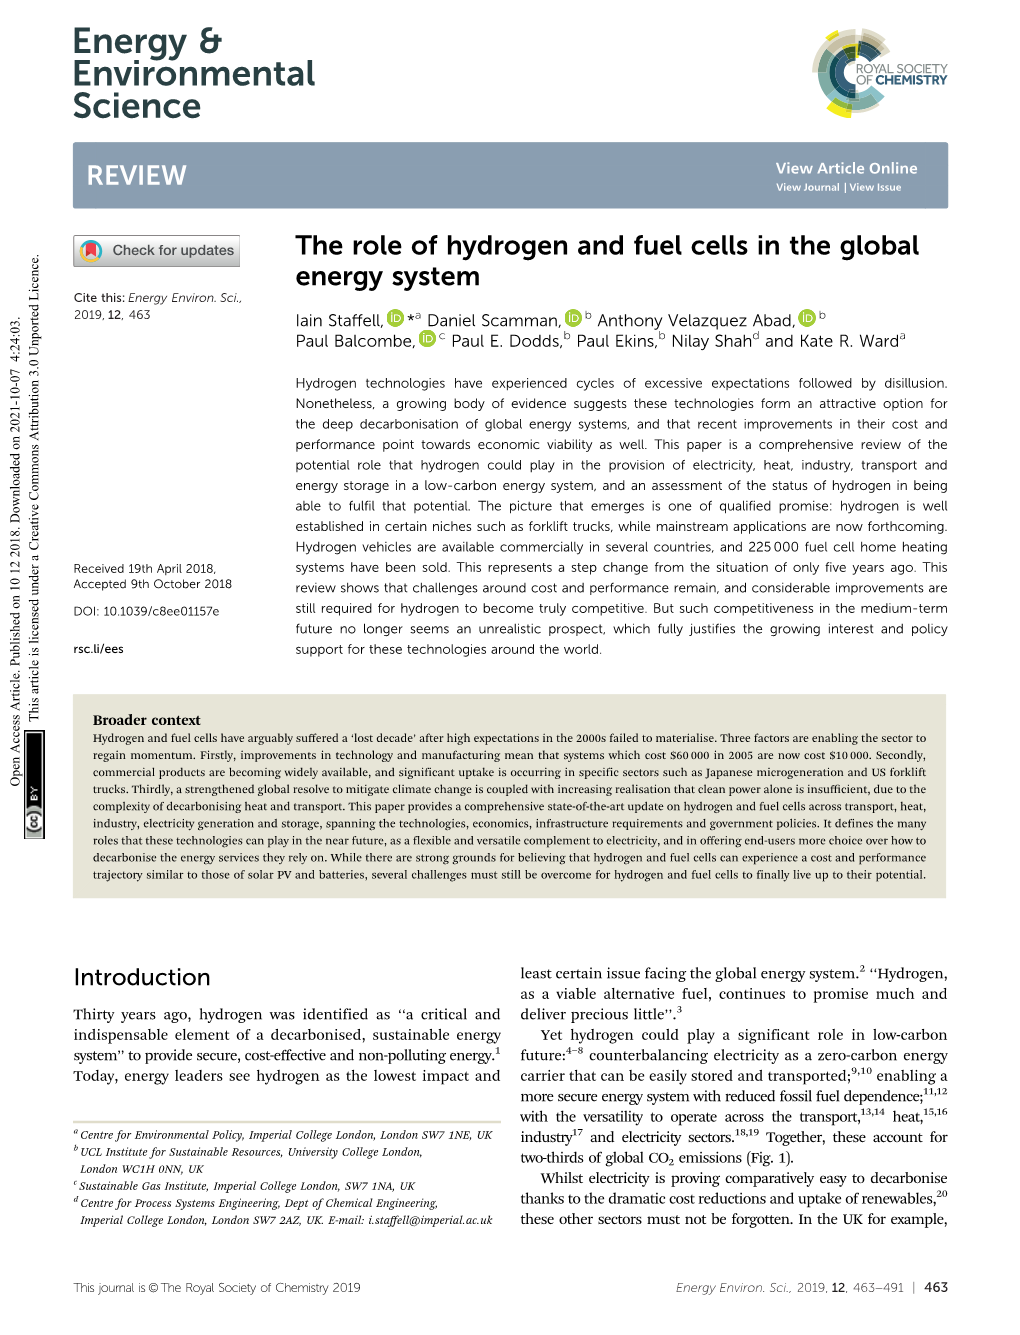 The Role of Hydrogen and Fuel Cells in the Global Energy System Cite This: Energy Environ